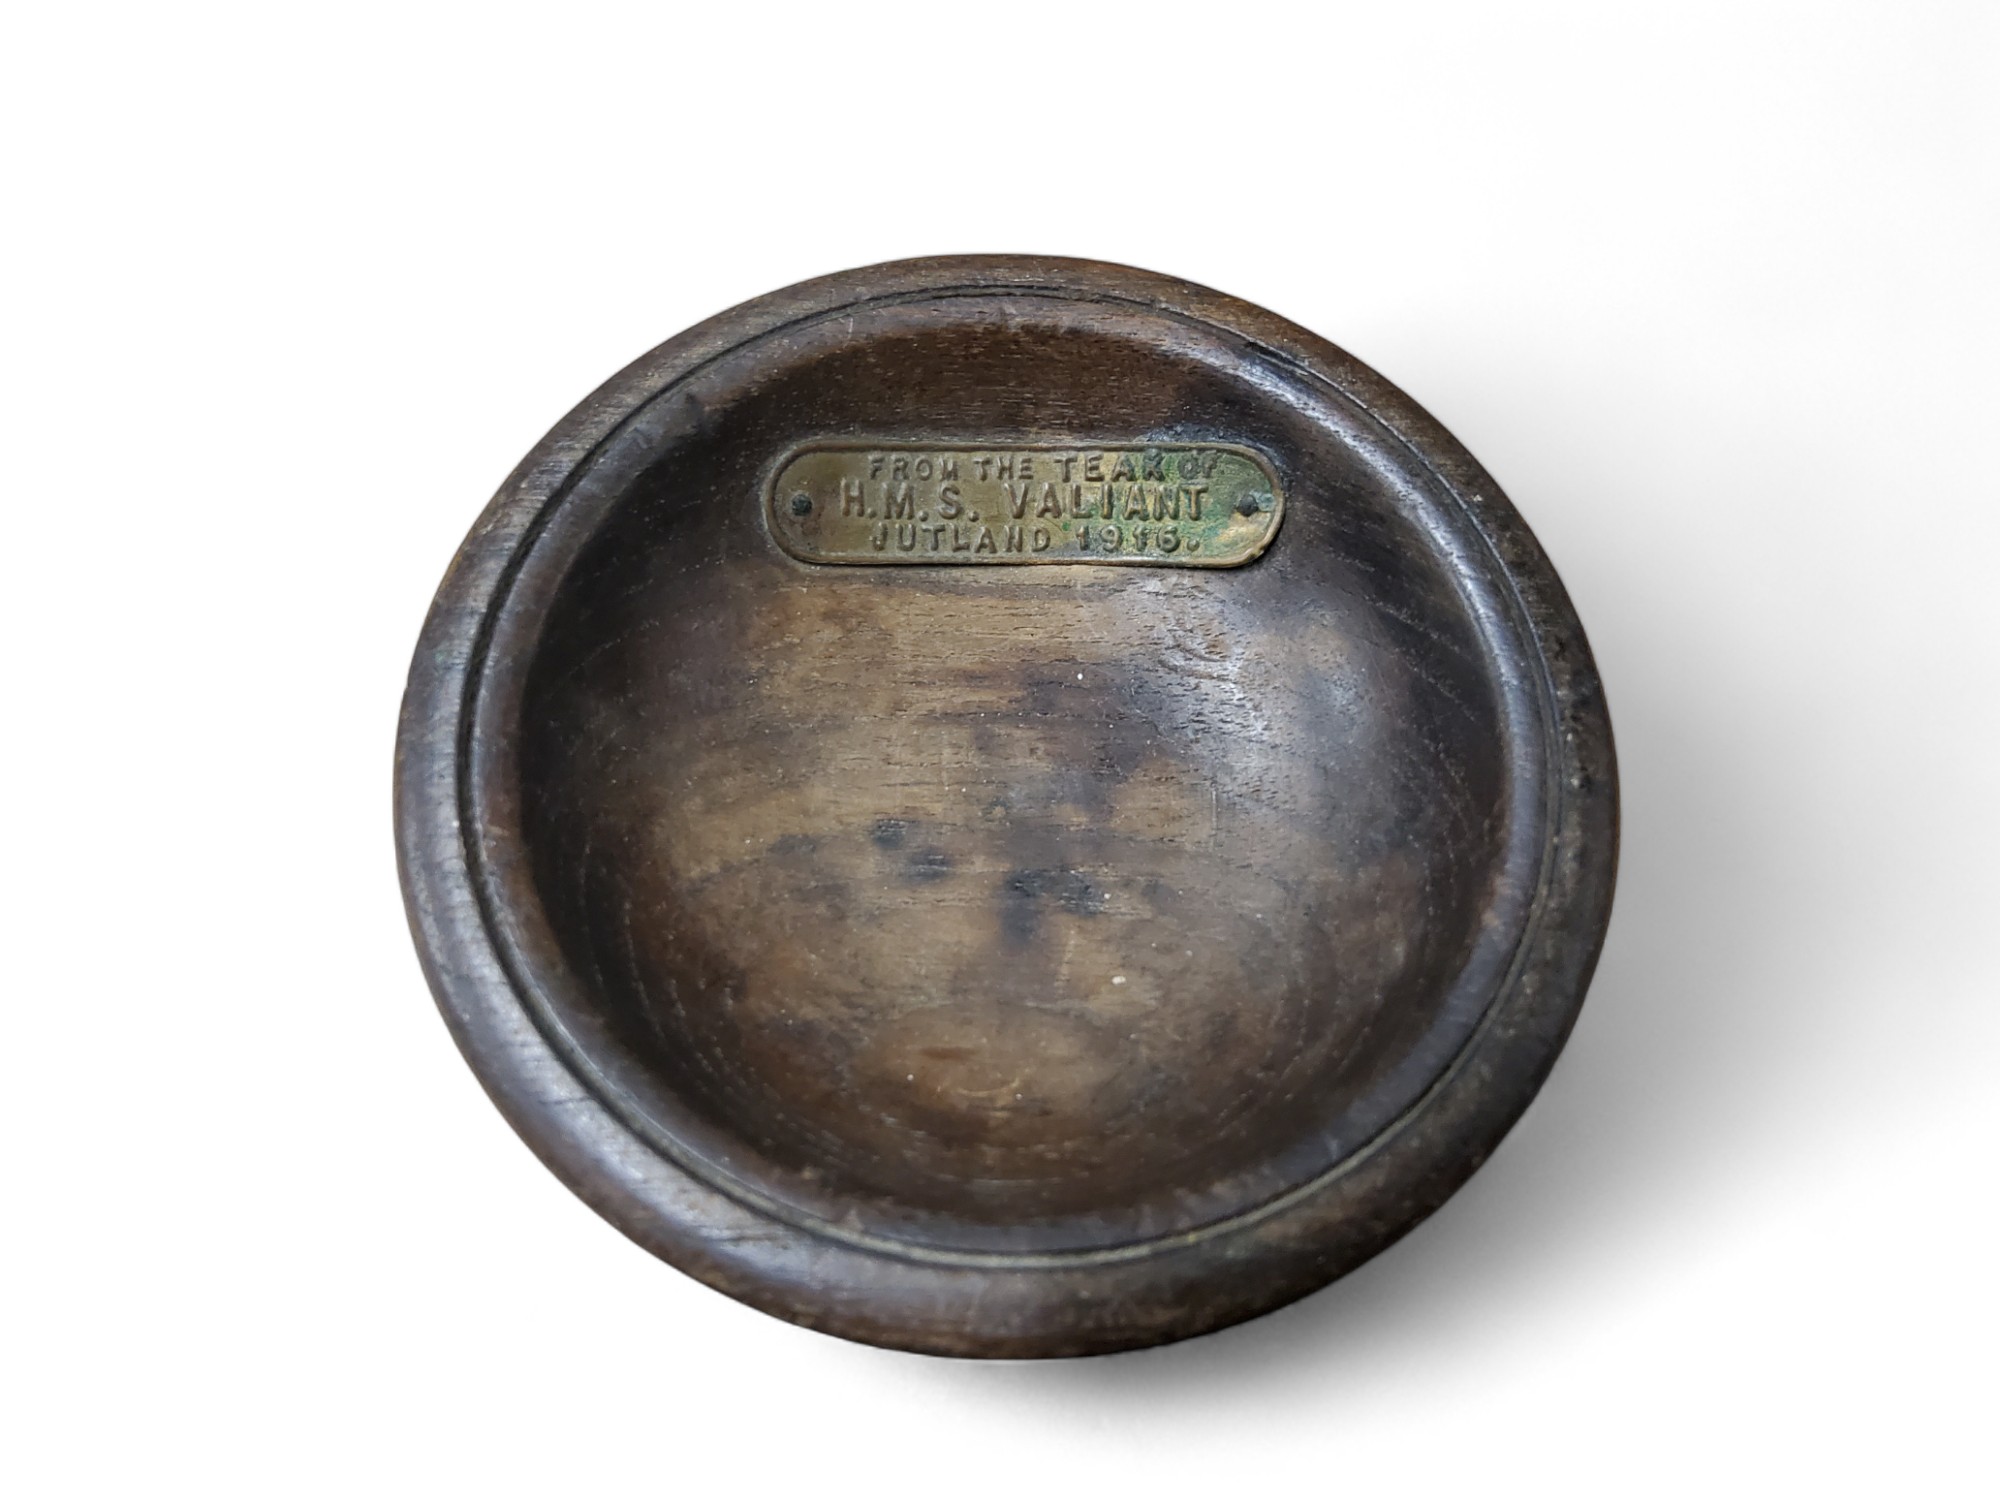 An early 20th century circular pin dish, with plaque, From the teak of H.M.S. Valiant, Jutland 1916,